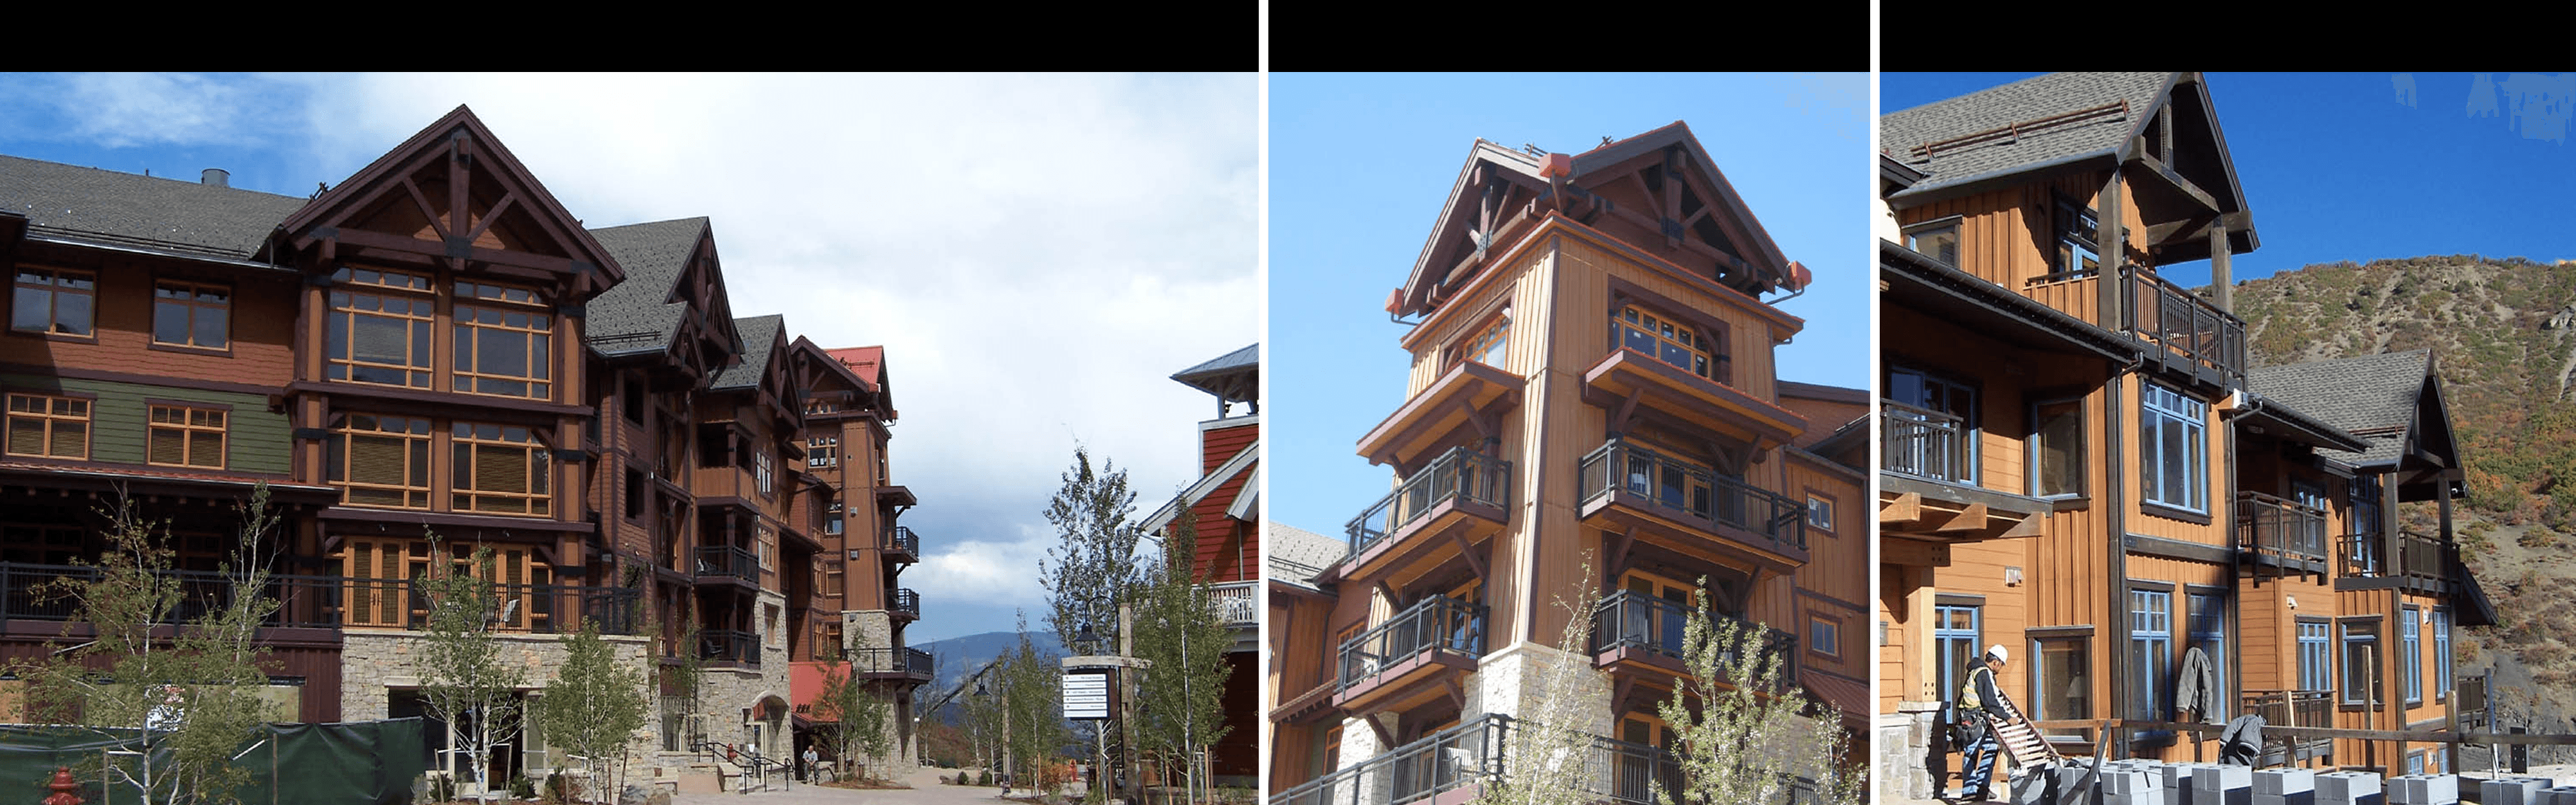 Stowe Mountain Lodge architecture solution provided from an architecture firm located in Colorado